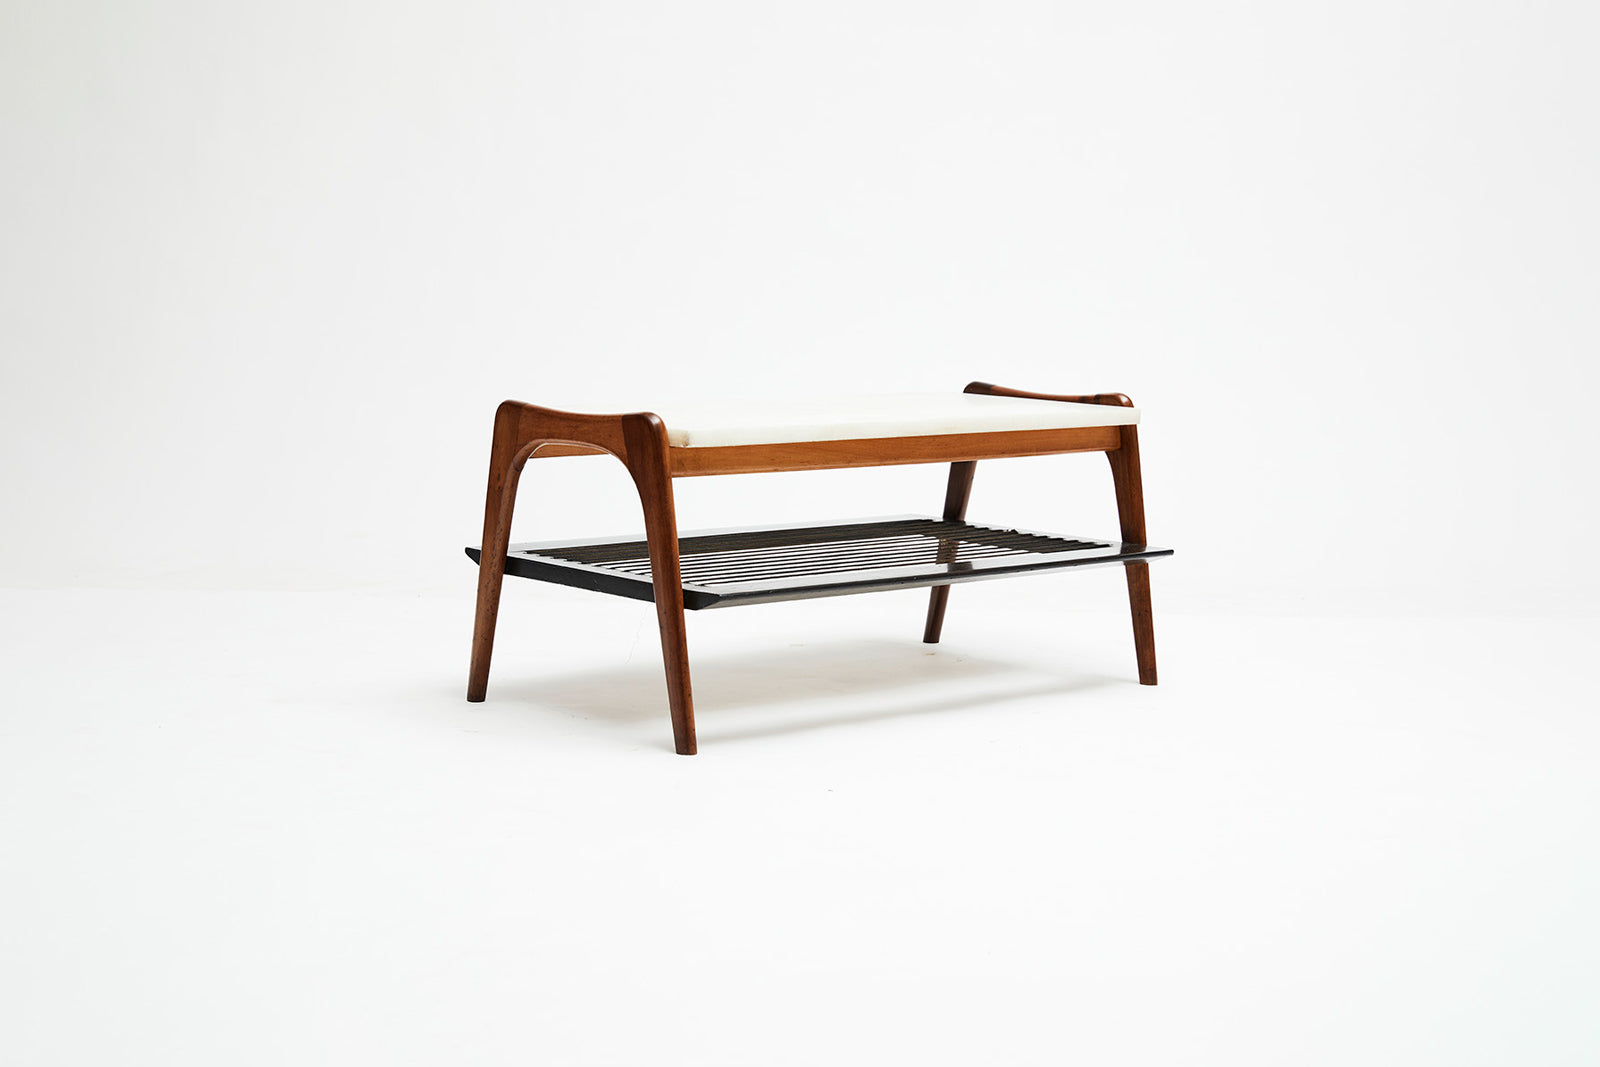 Coffee Table by Moveis Bergamo, c. 1950s - Lot 81